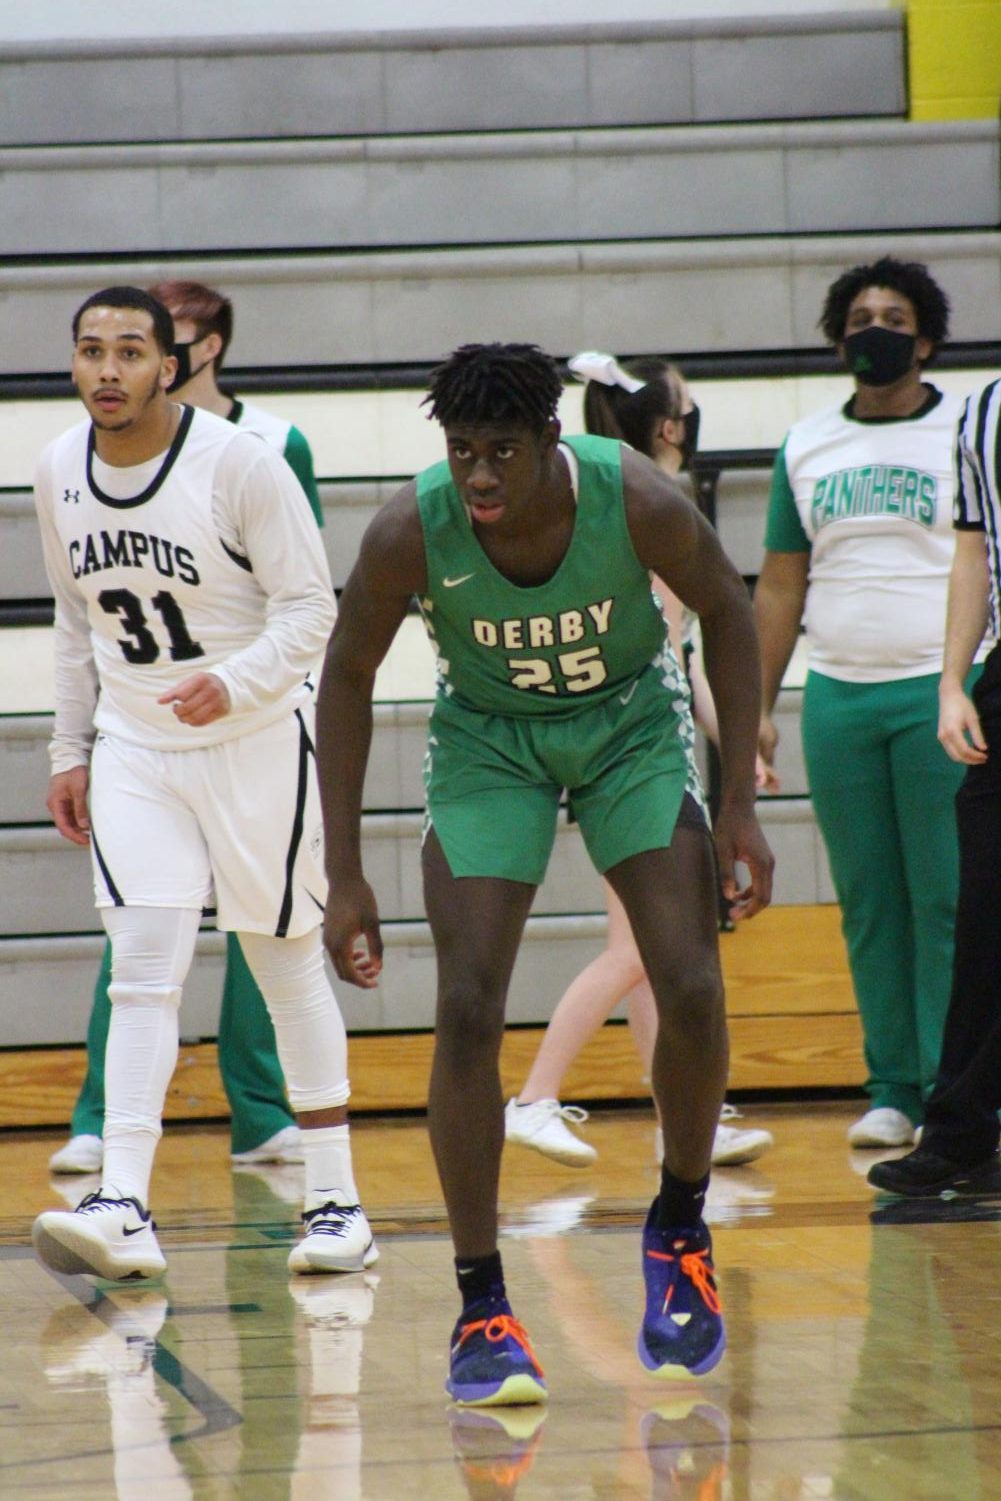 Derby+vs.+Campus+basketball+%28Photos+by+Janeah+Berry%29